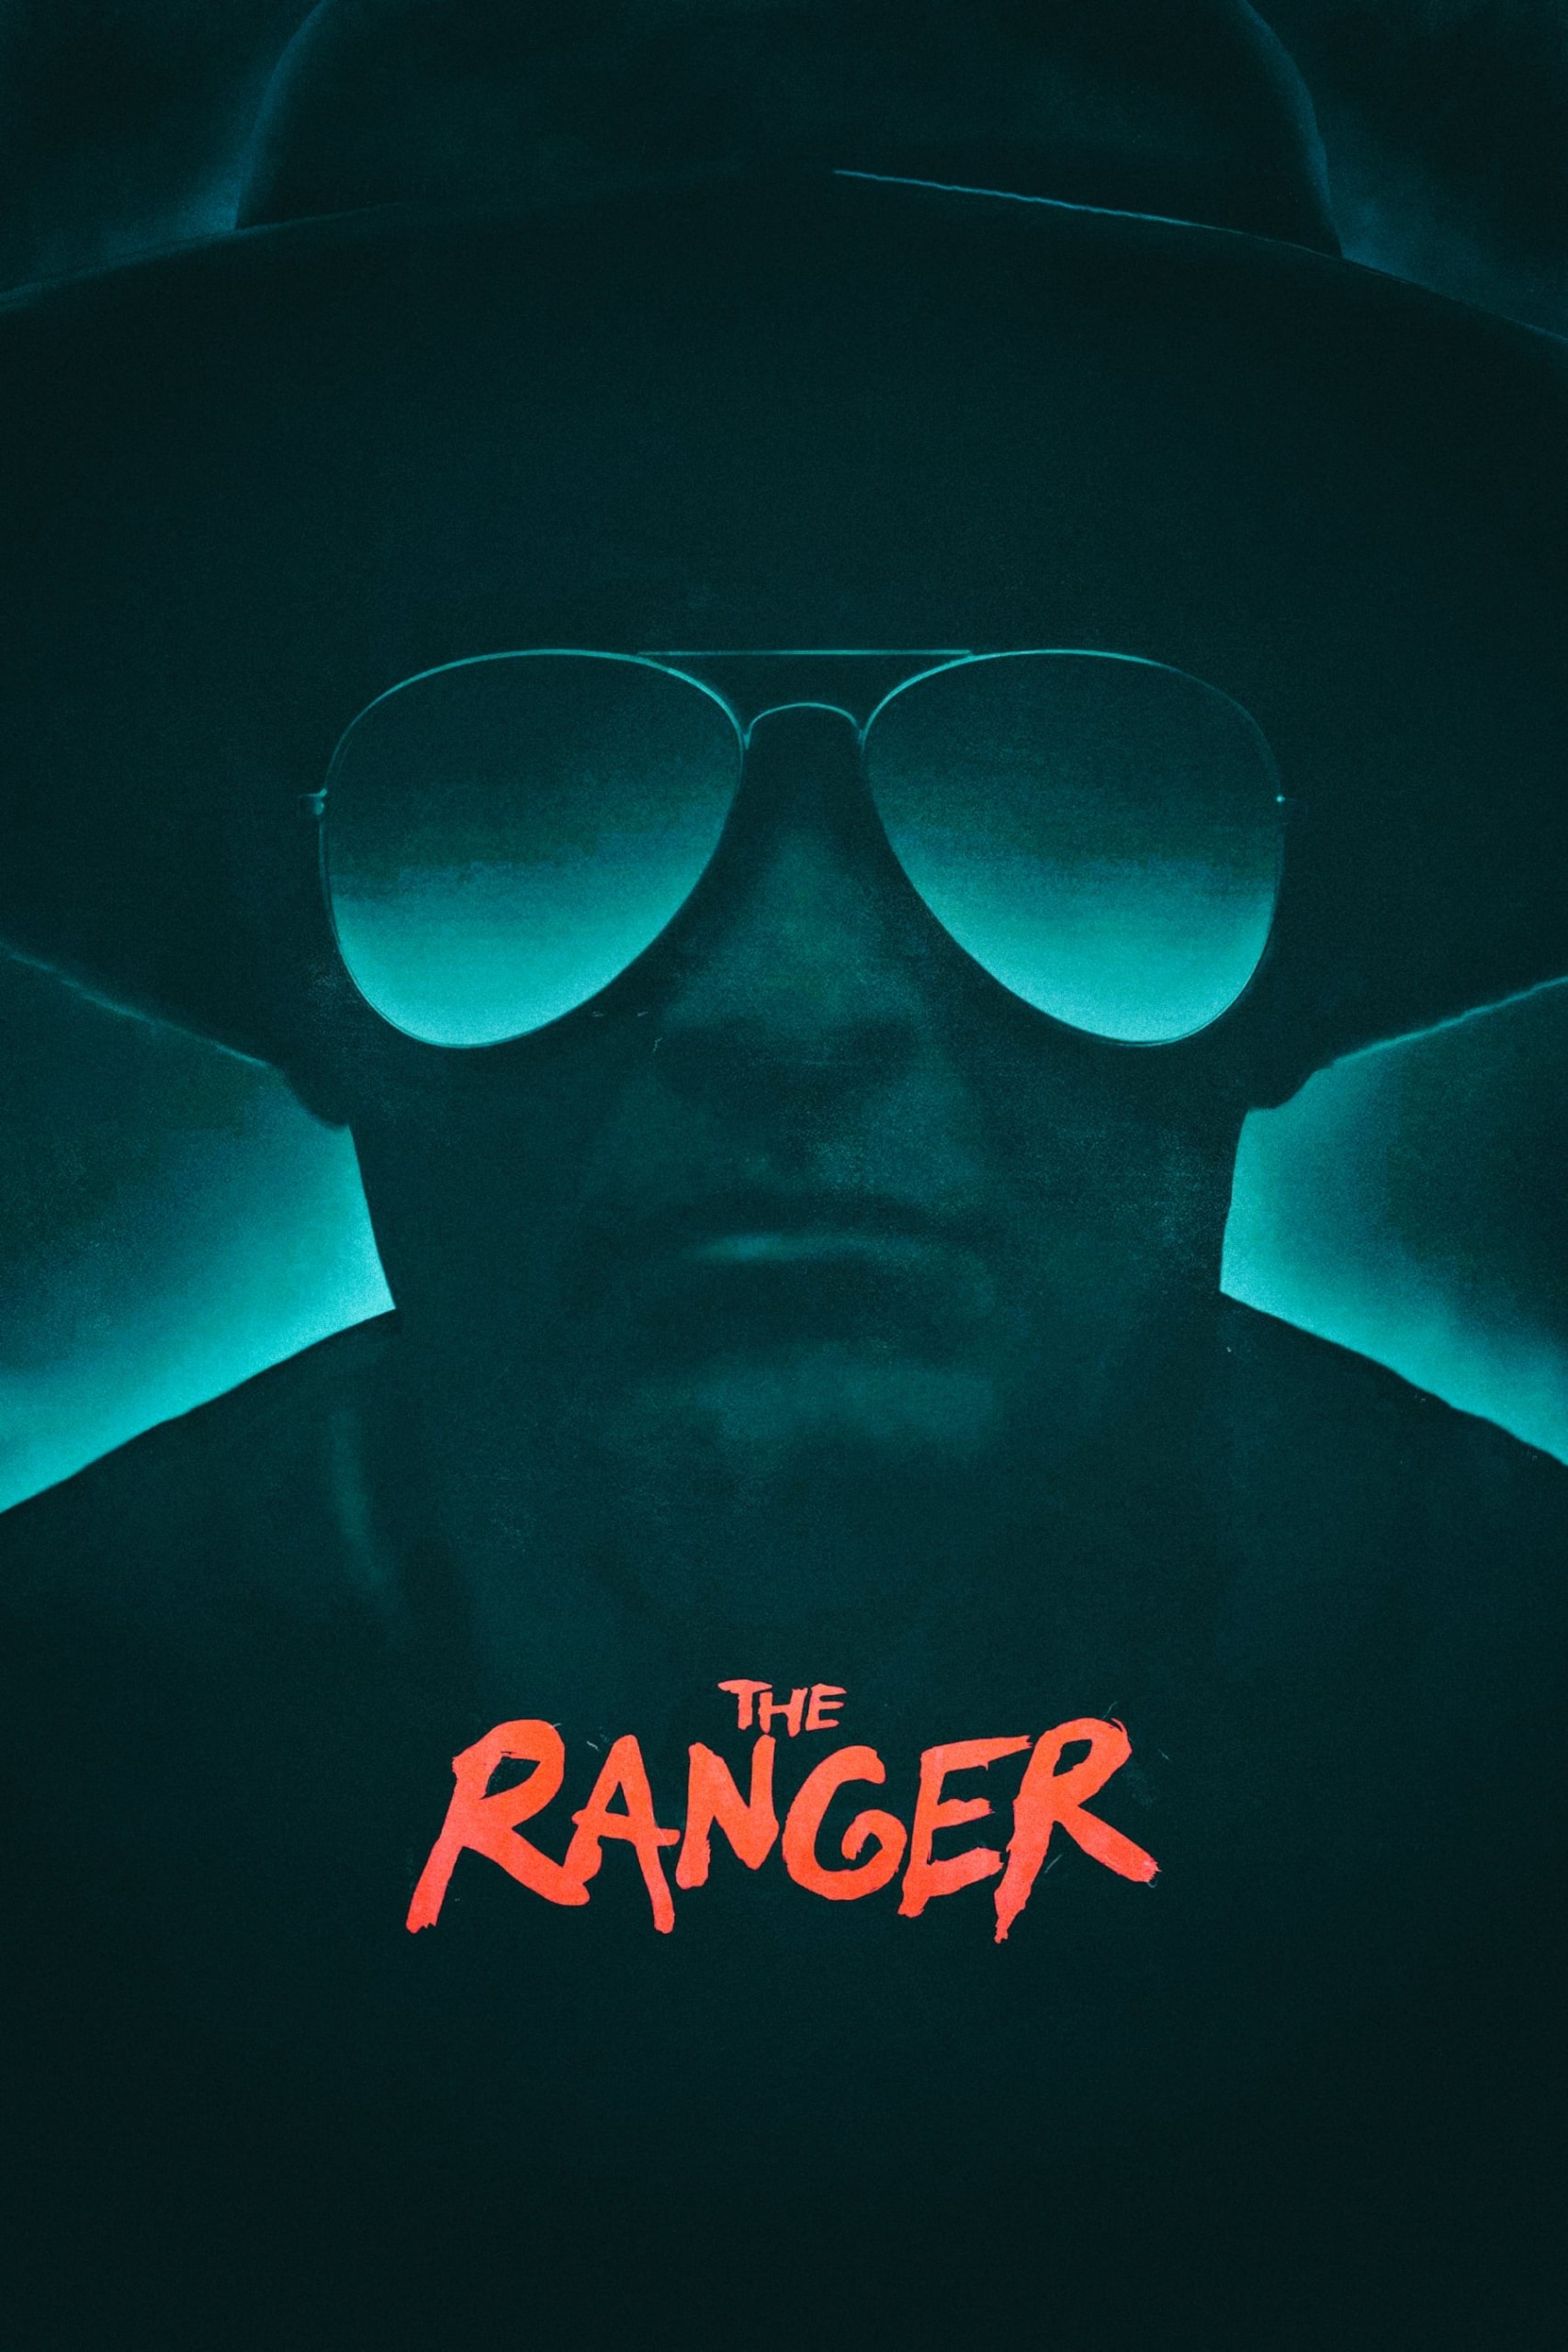 Poster for the movie "The Ranger"